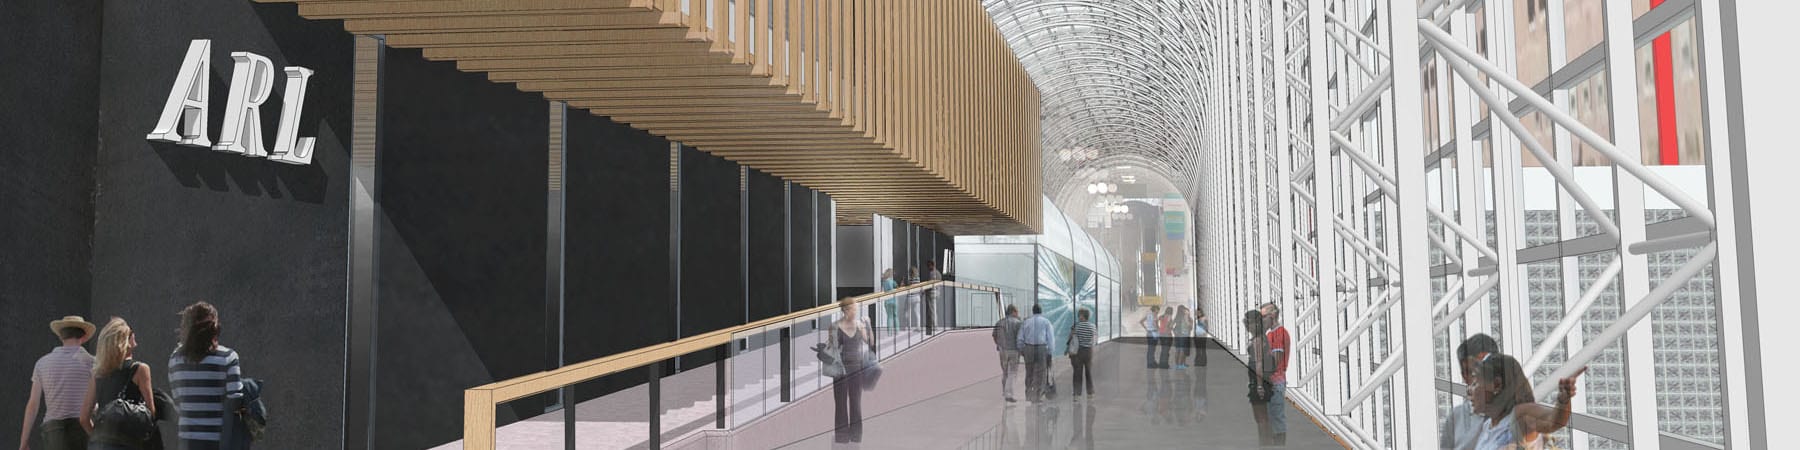 Union Station Air Rail Link interior rendering